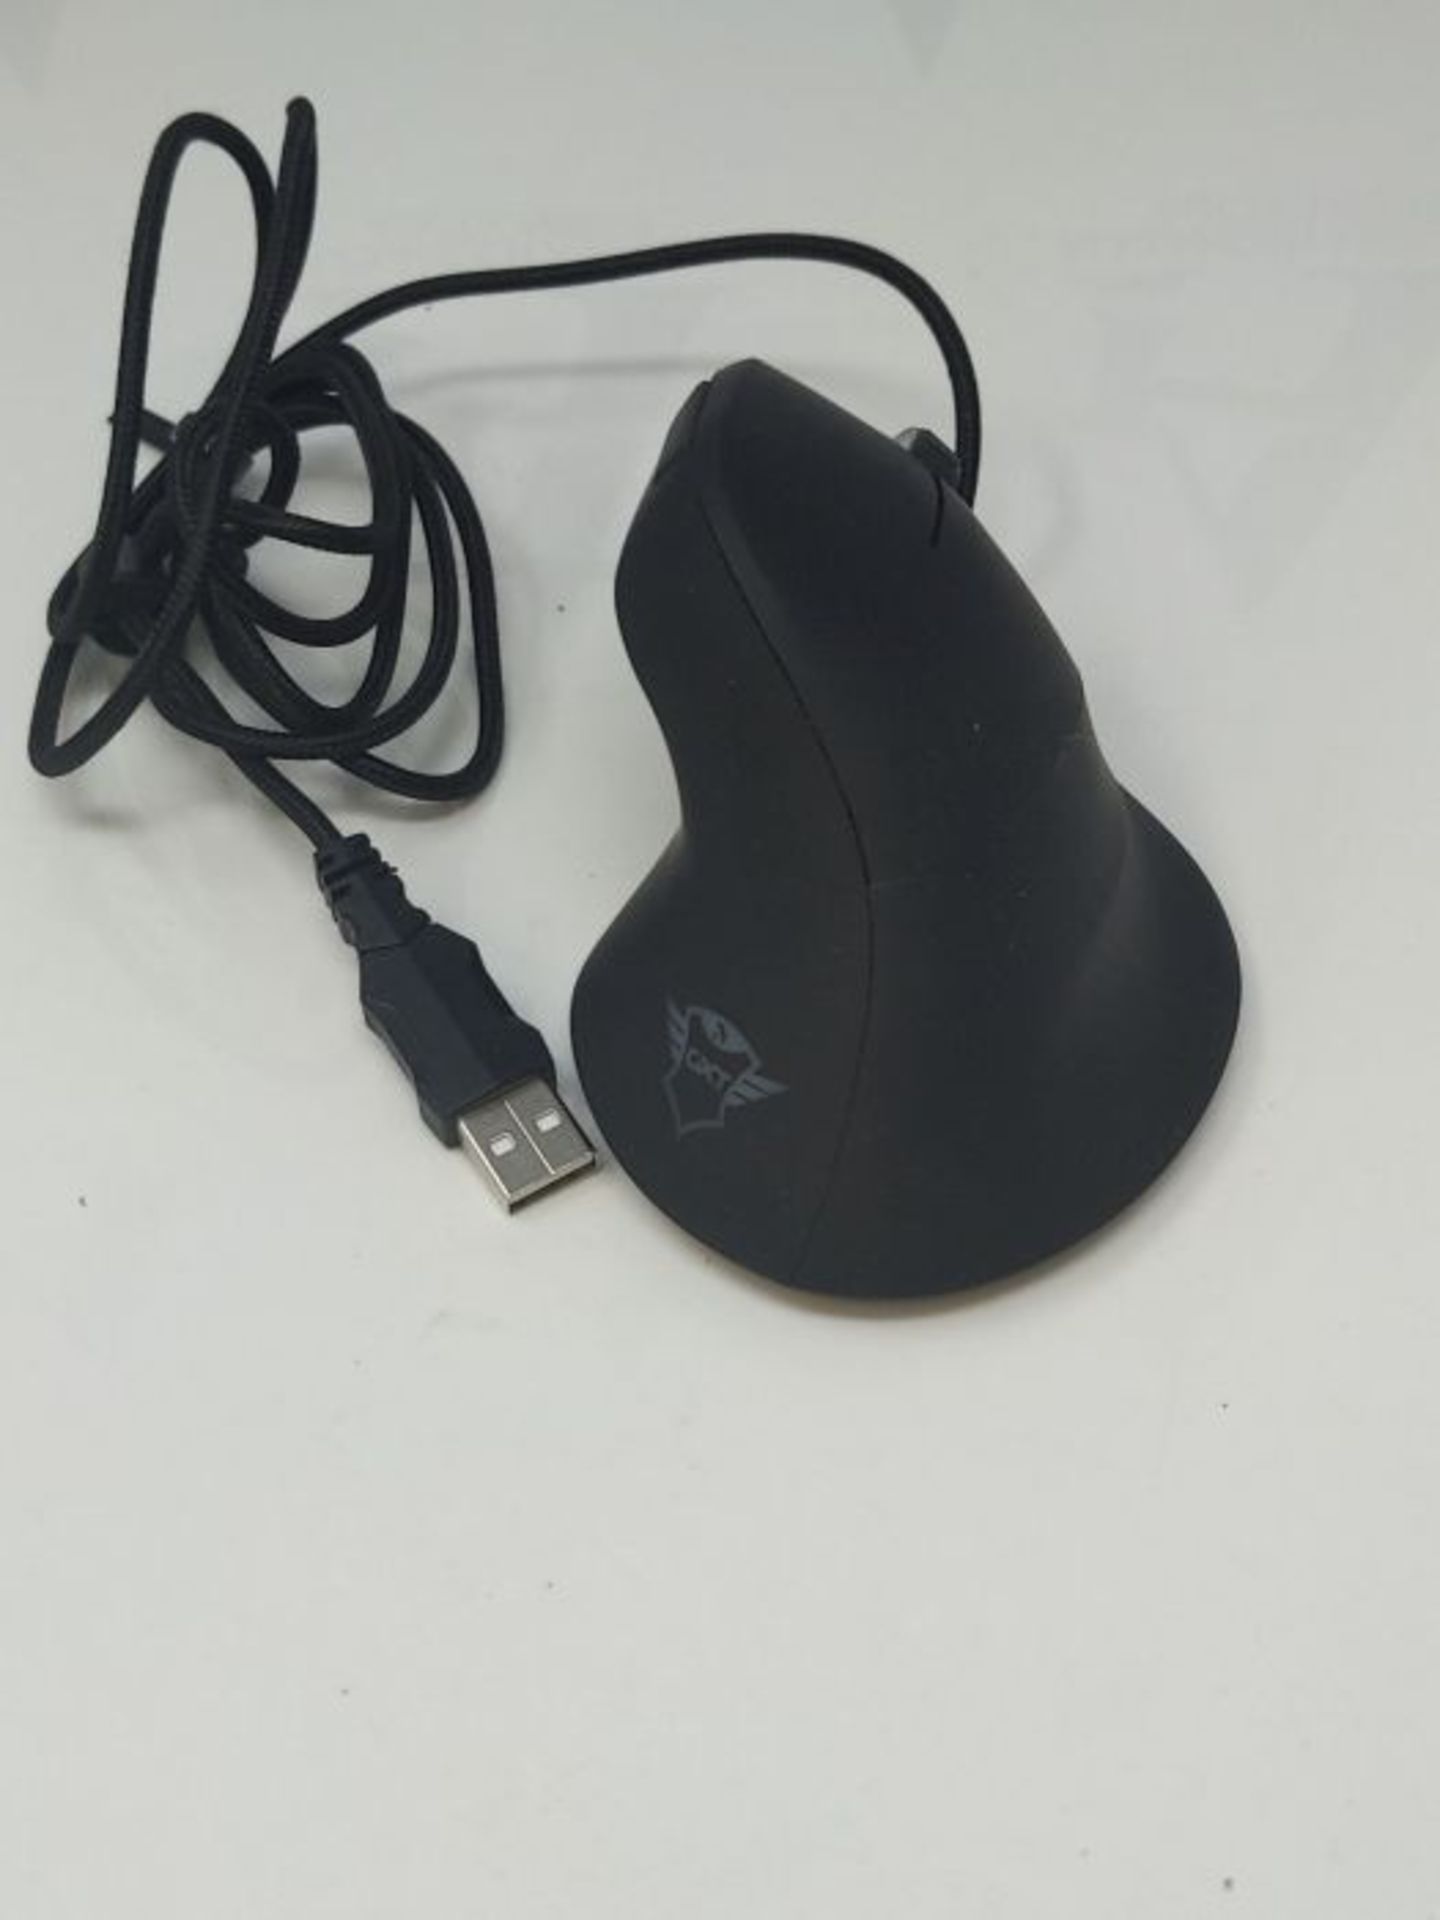 Trust Gaming Mouse GXT 144 Rexx, Vertical Ergonomic Mouse, 250-10,000 DPI, 6 Programma - Image 2 of 2